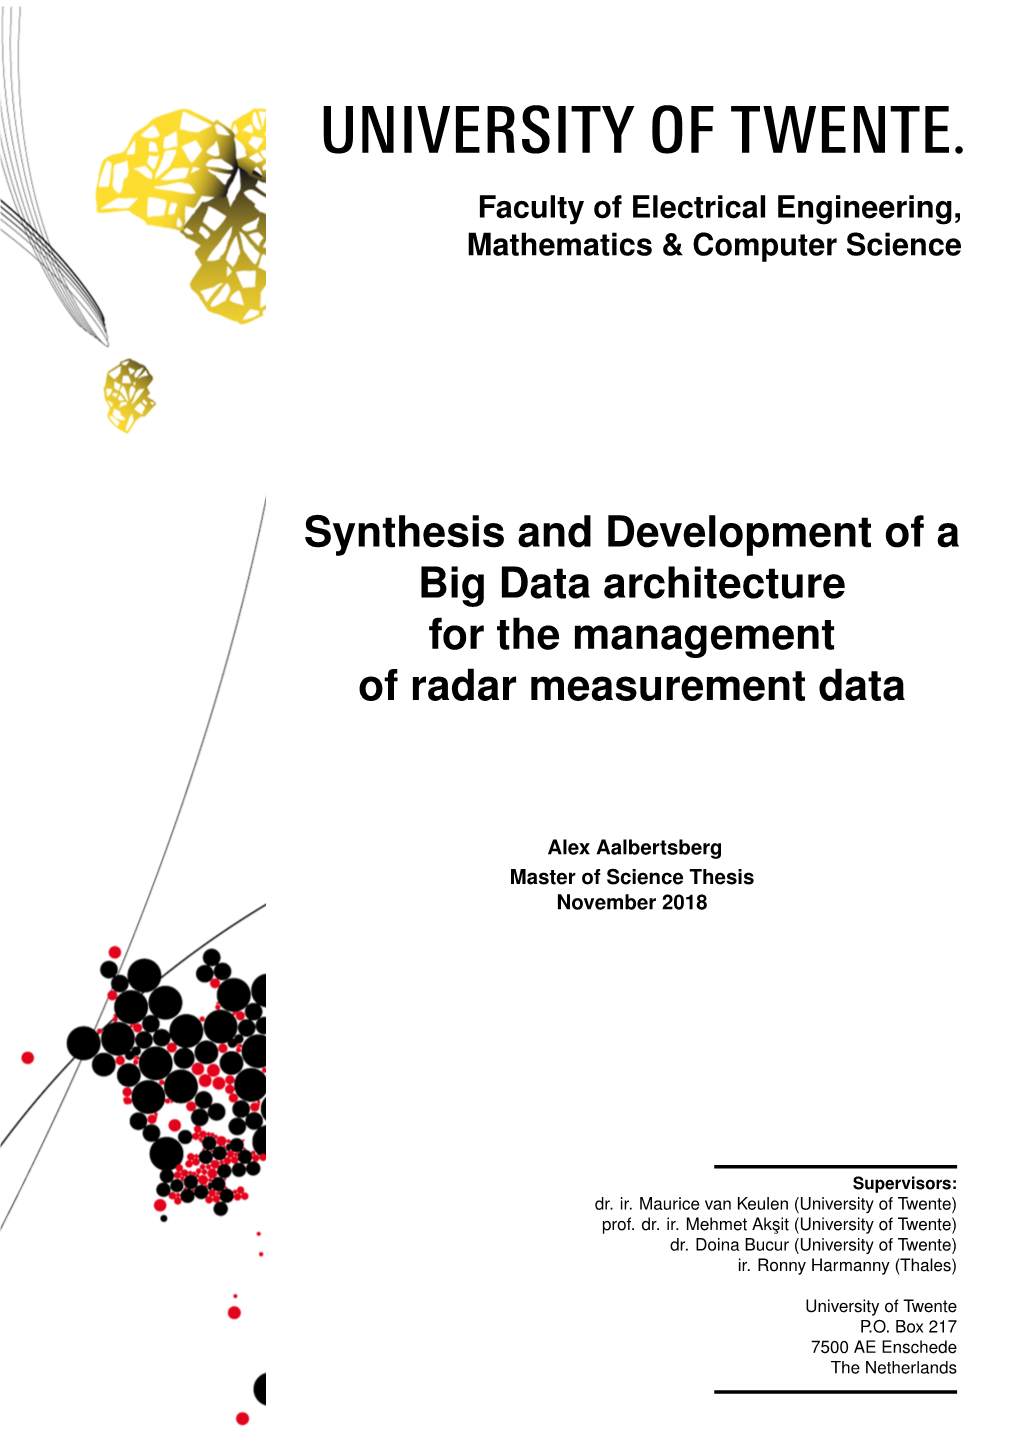 Synthesis and Development of a Big Data Architecture for the Management of Radar Measurement Data